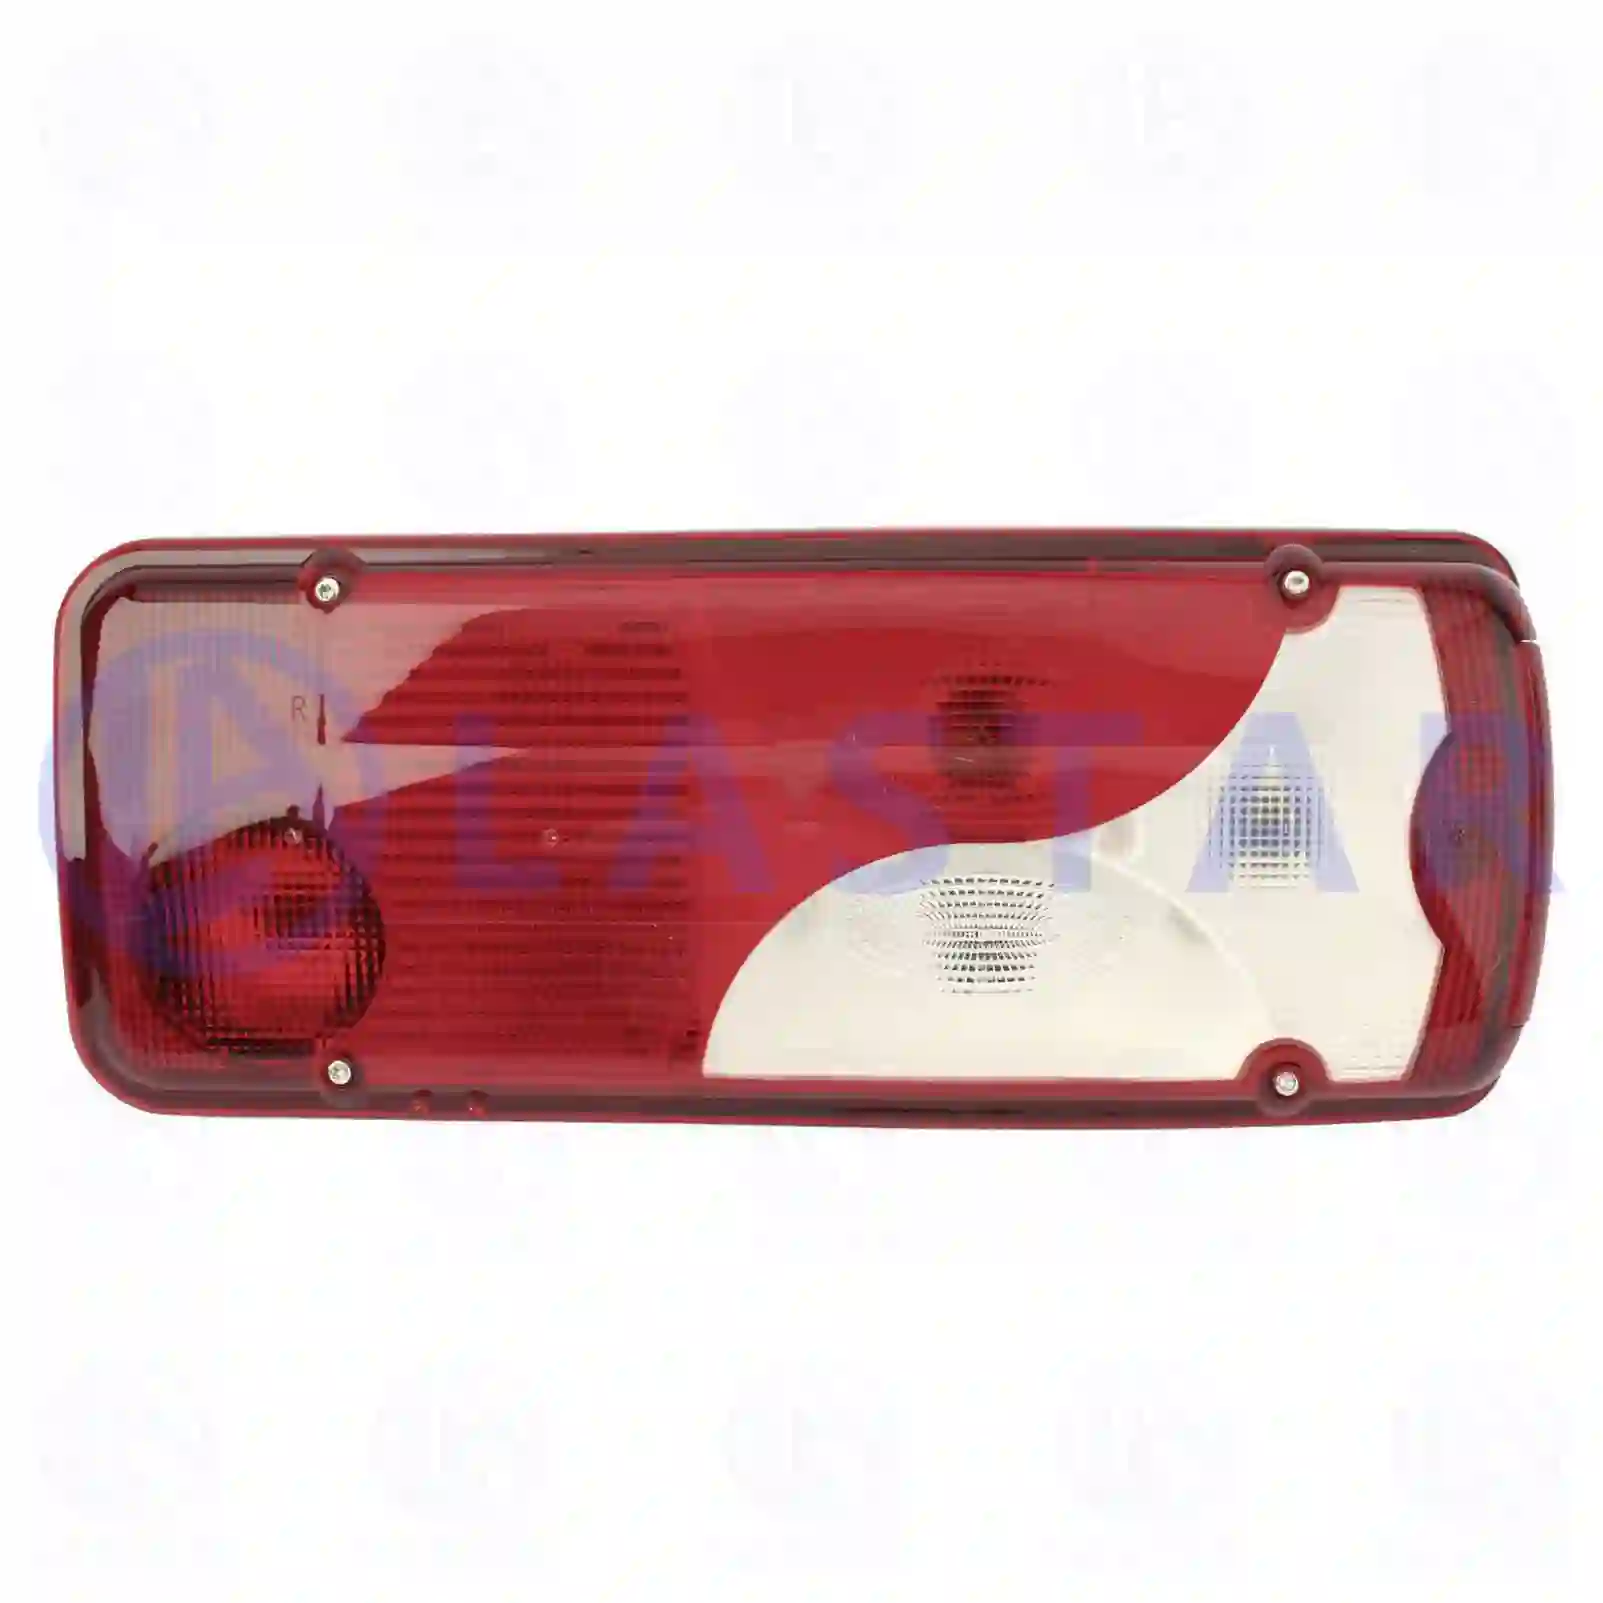 Tail lamp glass, right, 77711218, 0008262156, 0008262356, 9068262156, 1784670, 2E0945112, 2E0945112A, ZG21090-0008 ||  77711218 Lastar Spare Part | Truck Spare Parts, Auotomotive Spare Parts Tail lamp glass, right, 77711218, 0008262156, 0008262356, 9068262156, 1784670, 2E0945112, 2E0945112A, ZG21090-0008 ||  77711218 Lastar Spare Part | Truck Spare Parts, Auotomotive Spare Parts